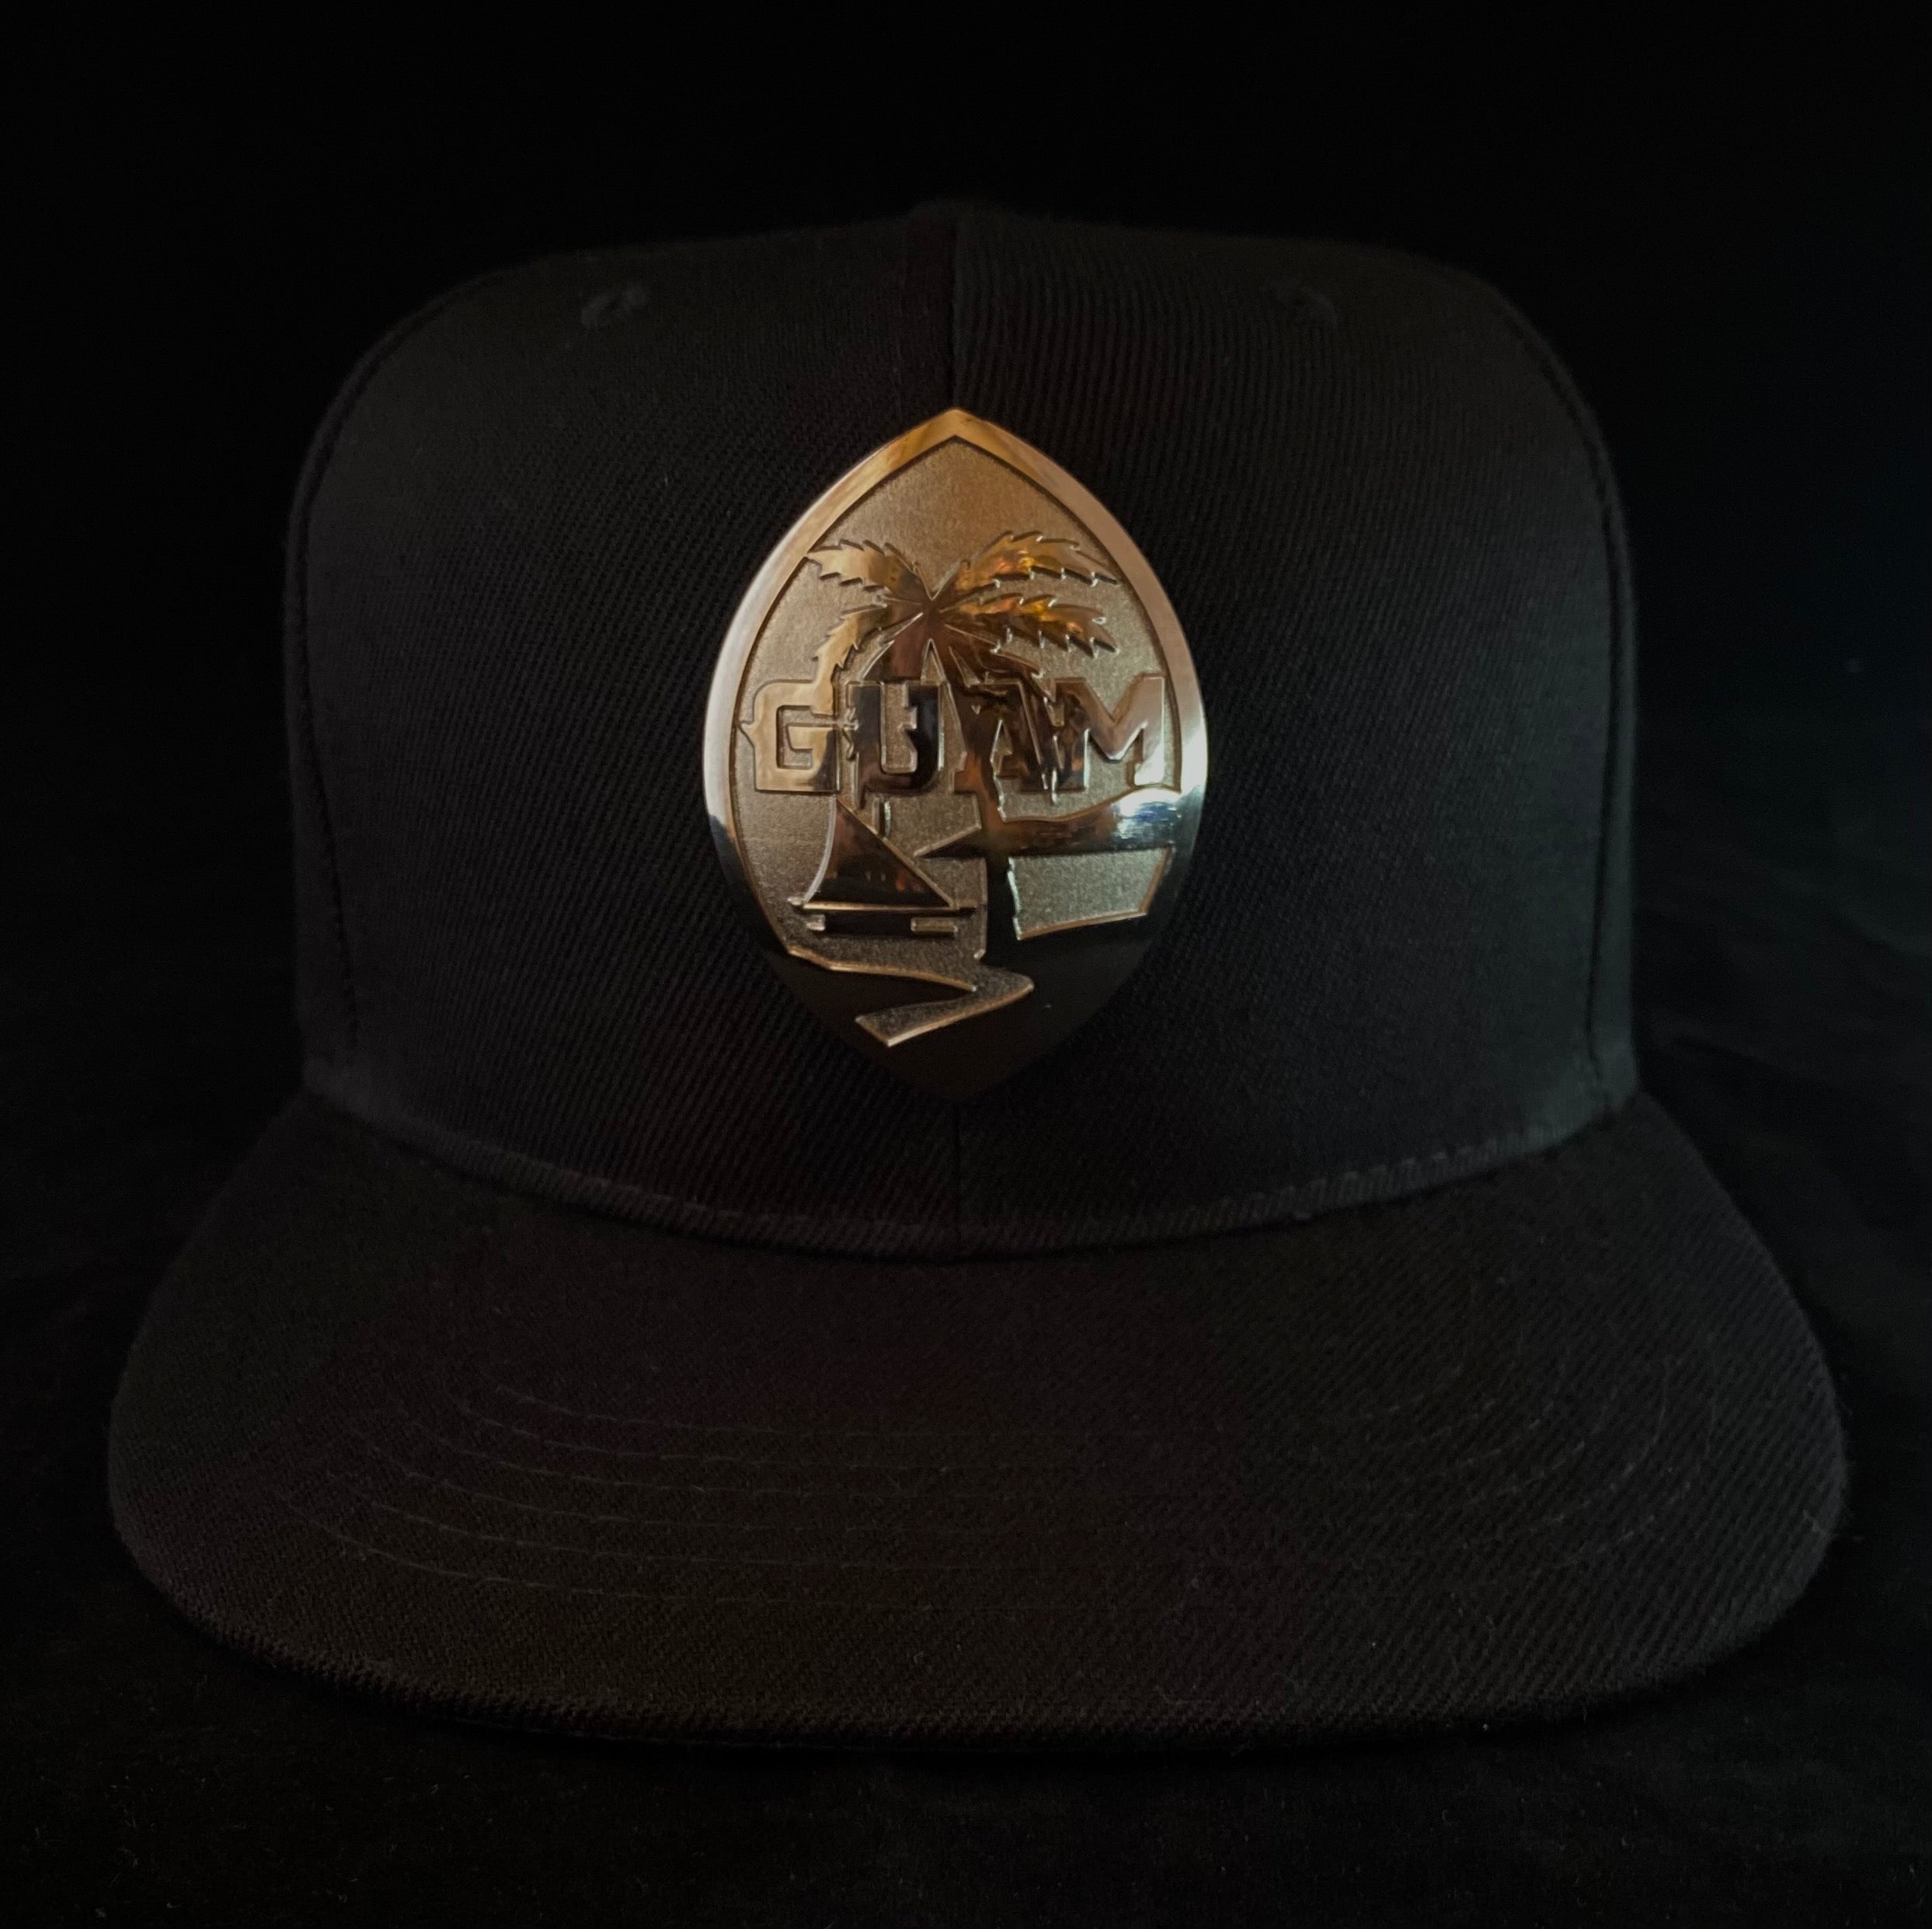 GUAM STEEL FITTED HATS